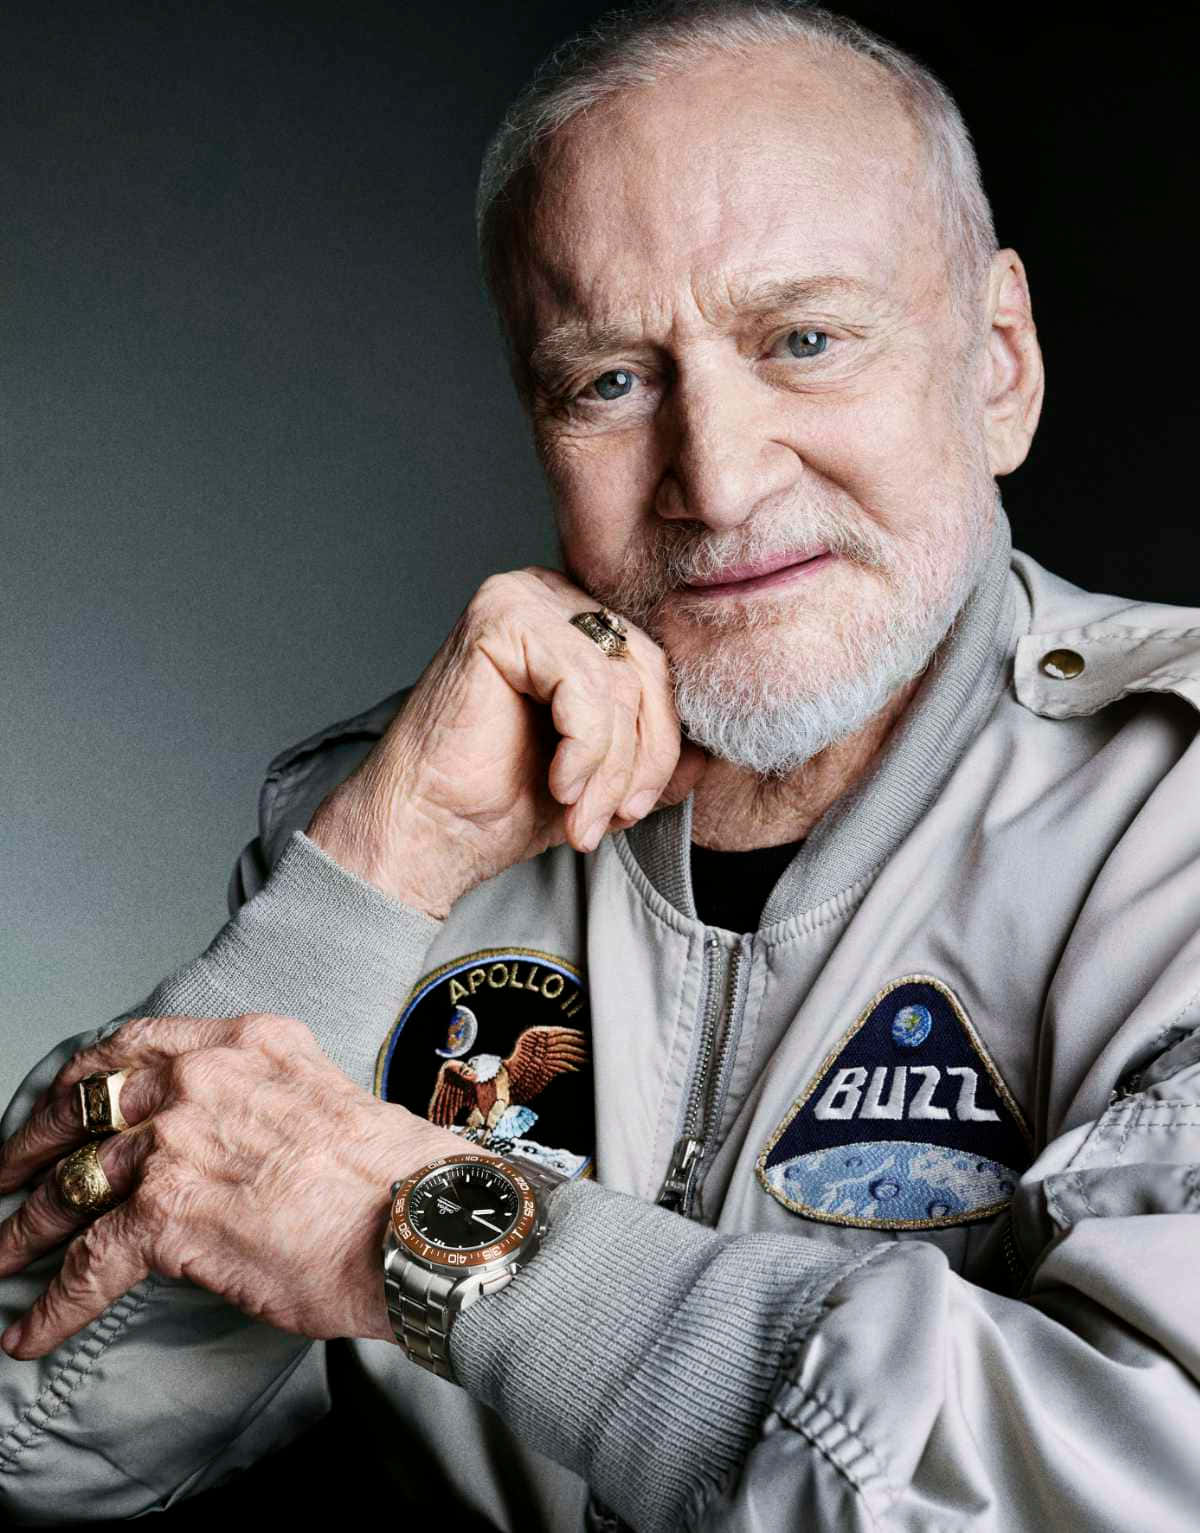 Buzz Aldrin On The Surface Of The Moon Wallpaper